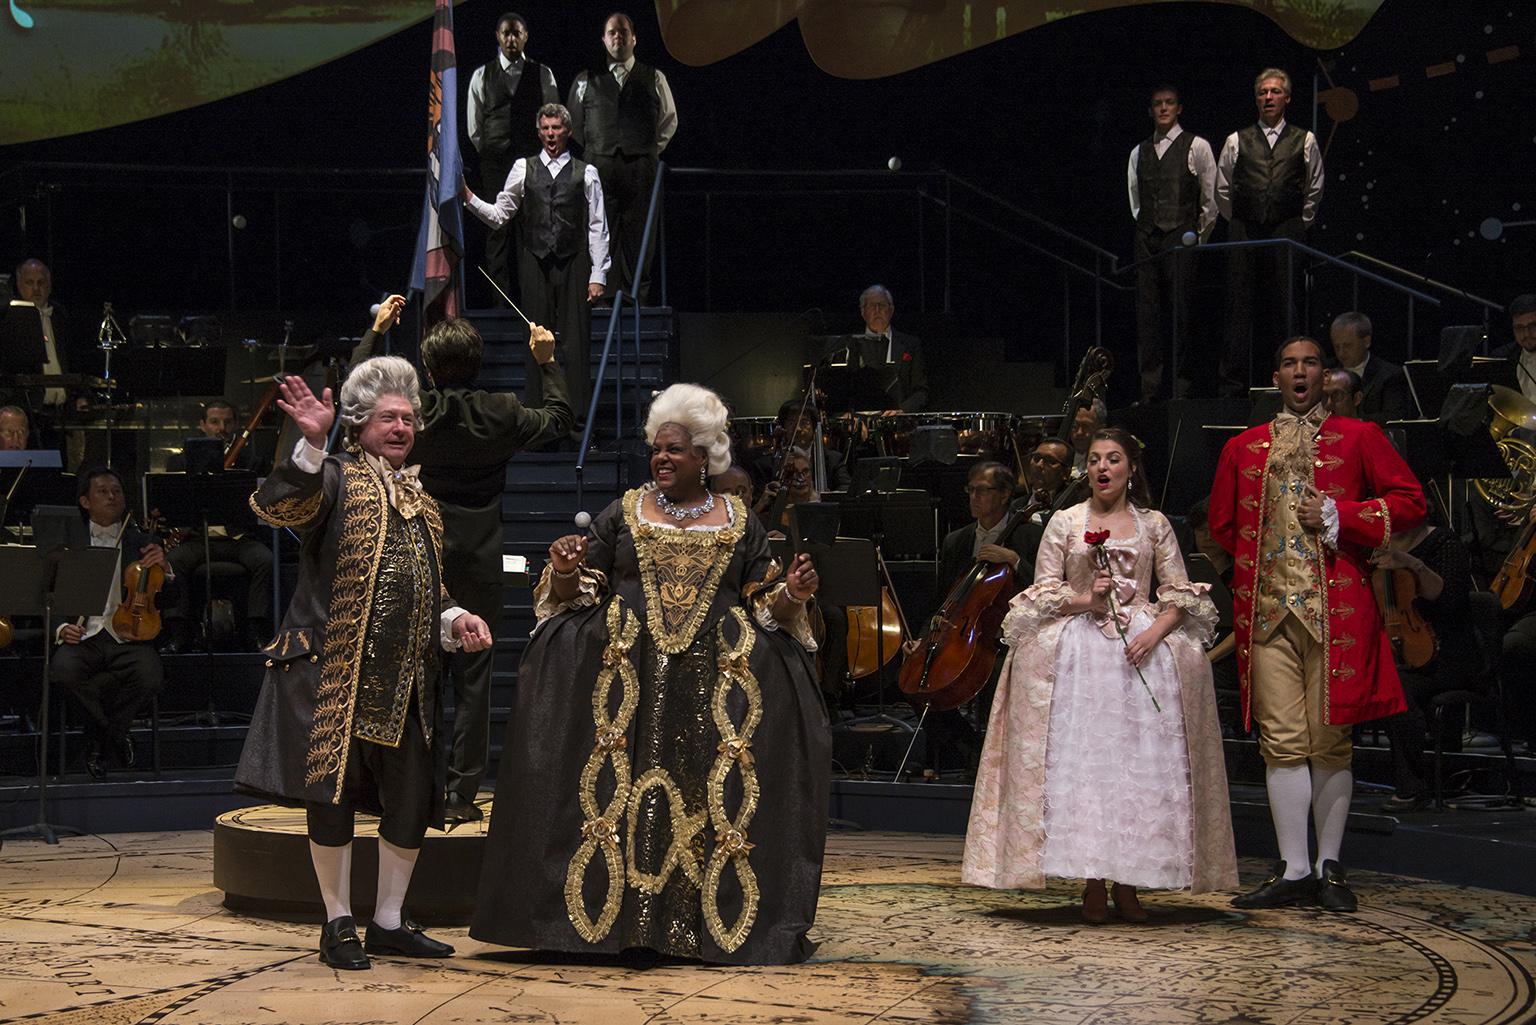 Roderick Peeples, Tracey Copeland Halter, Cecilia Iole and Jonathan Christopher in “Candide.” (Photo by Brynn Yeager)